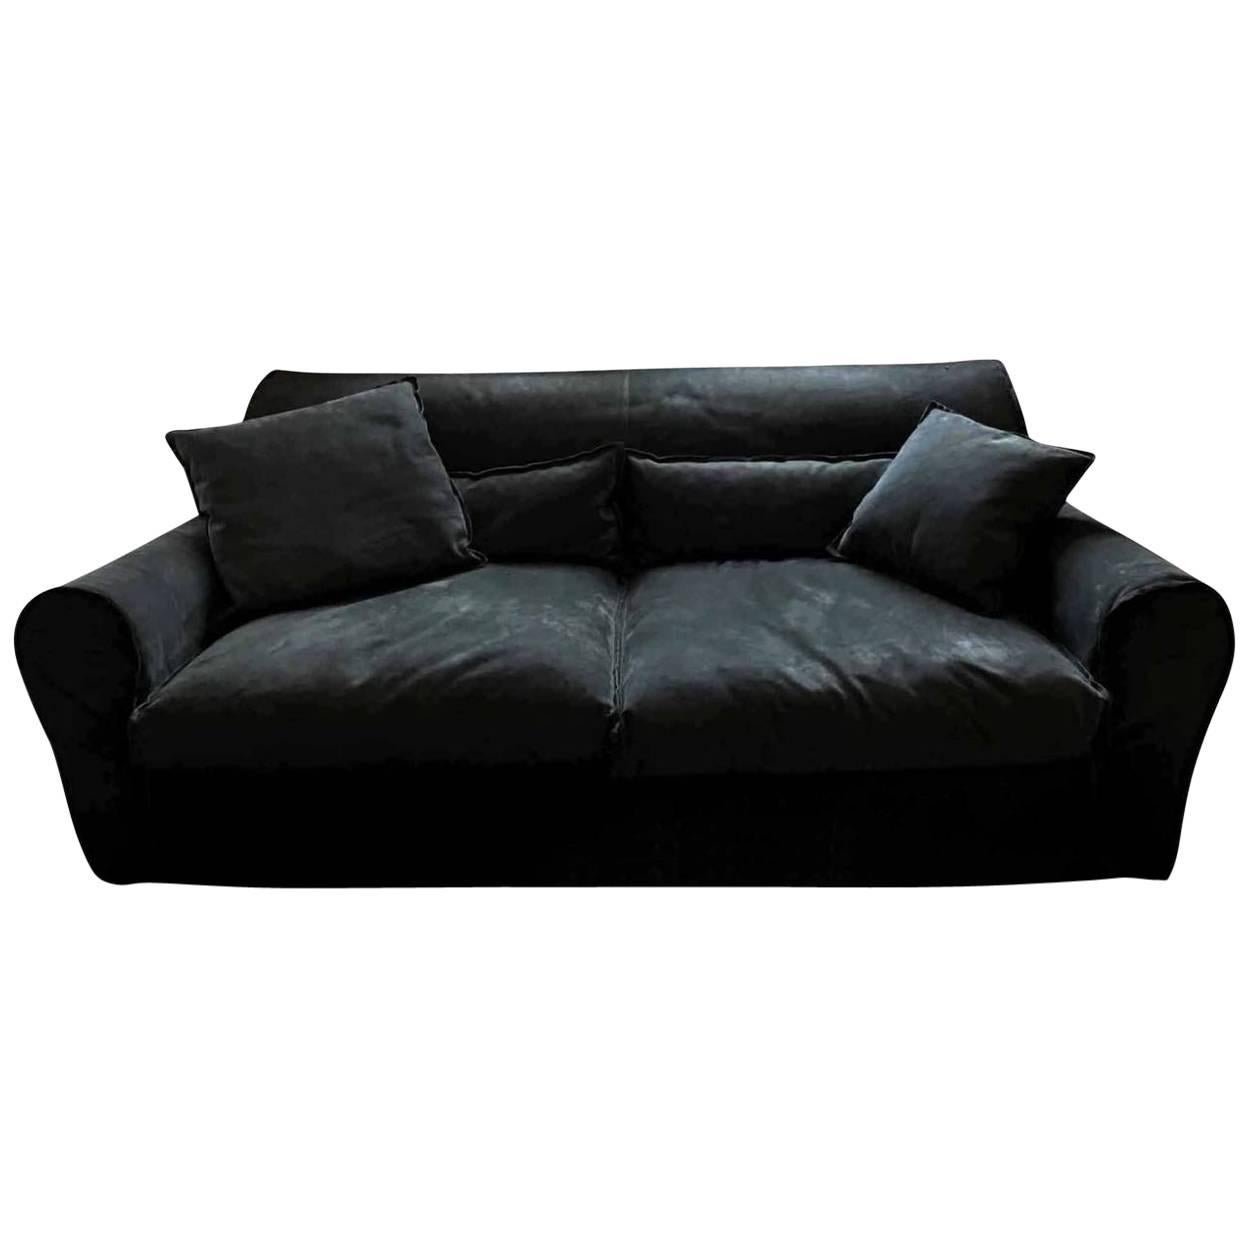 Sofa "Housse" by Manufacturer Baxter Finished in Roughout Leather For Sale